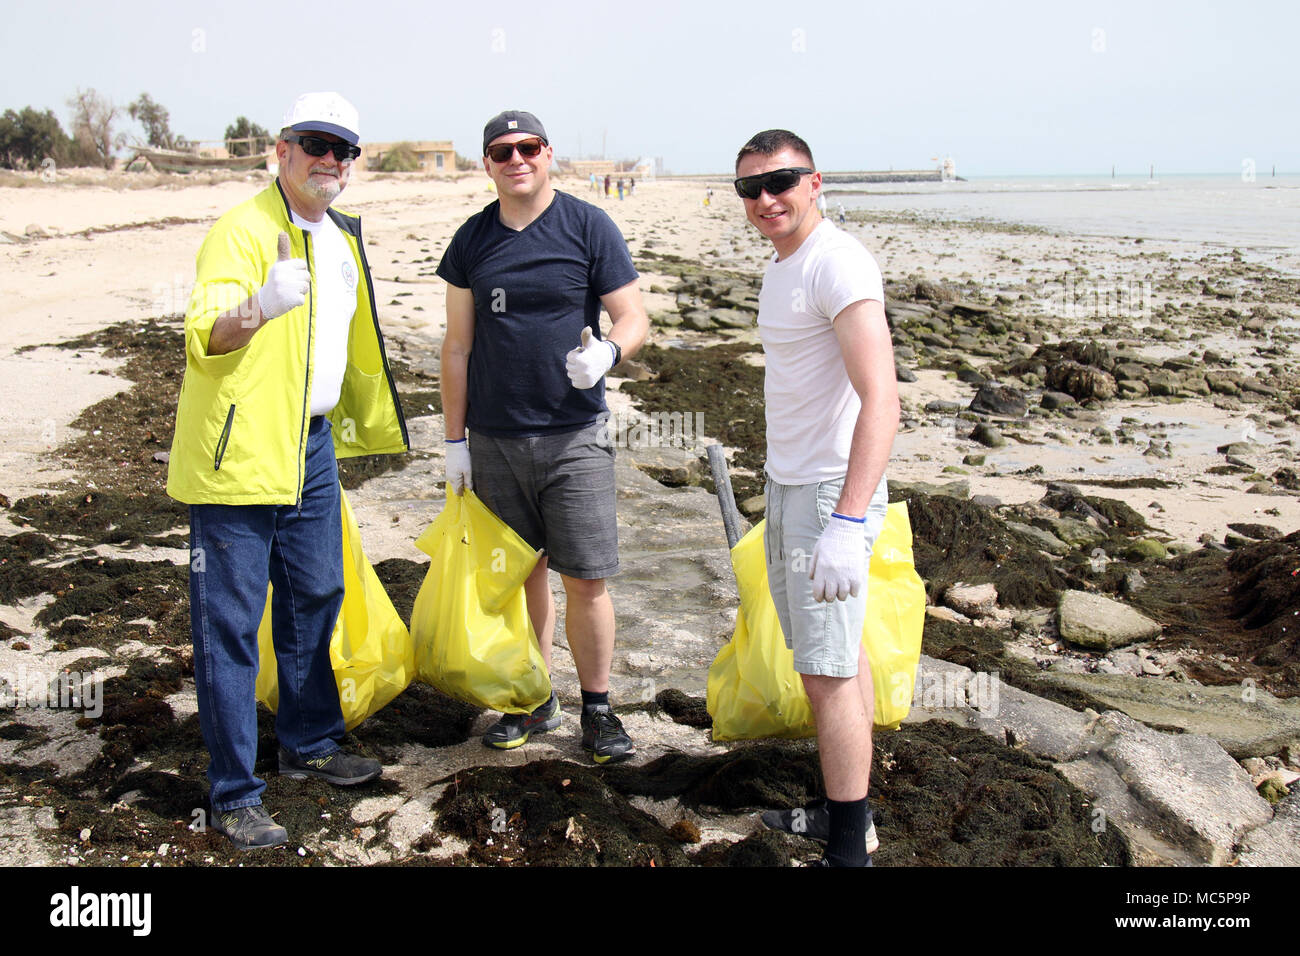 KUWAIT CITY, Kuwait — U.S. Ambassador to Kuwait Lawrence Silverman (left) pauses during a cleanup at Anjafa Beach for a photo with Pa. Army National Guard Soldiers Sgt. Timothy Reed (center) of Latrobe and Spc. Anthony Massaro of Philadelphia on April 7, 2018. Reed and Massaro are with Charlie Company, Headquarters and Headquarters Battalion, 28th Infantry Division and are deployed to Kuwait as part of Task Force Spartan. The event was the latest in an ongoing effort to rid Kuwait beaches of pollution. (U.S. Army photo by Sgt. 1st Class Doug Roles) Stock Photo